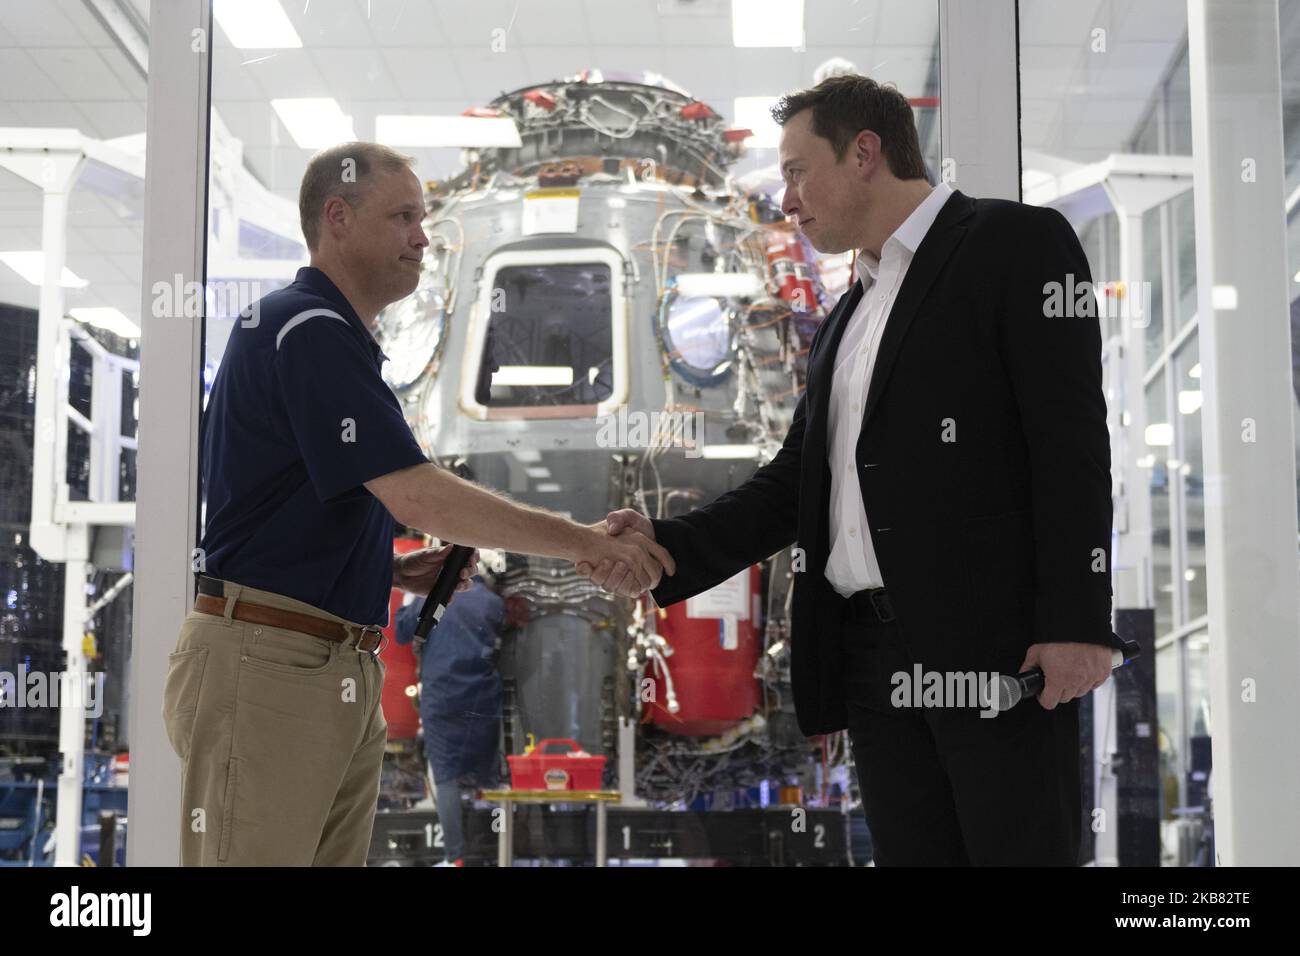 NASA administrator Jim Bridenstine and SpaceX Chief Engineer Elon Musk shake hands in front of Crew Dragon cleanroom at SpaceX Headquarters in Hawthorne, California on October 10, 2019. (Photo by Yichuan Cao/NurPhoto) Stock Photo